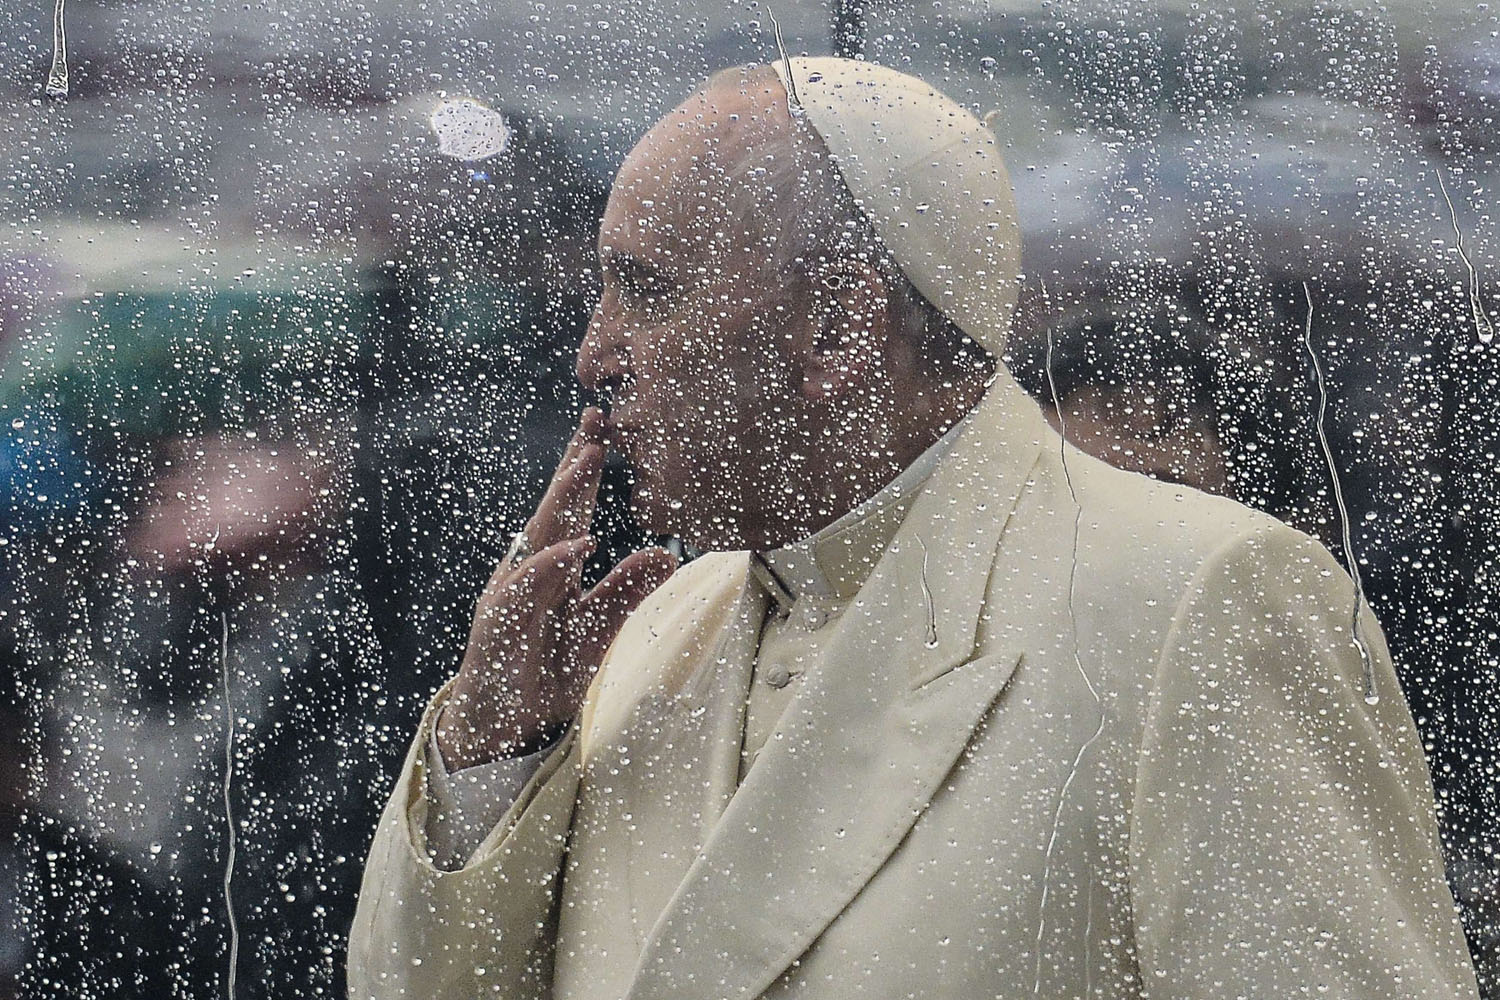 Feb. 5, 2014. Pope Francis blows a kiss to pilgrims gathered at Saint Peter's square in the Vatican upon his arrival to lead the general weekly audience.